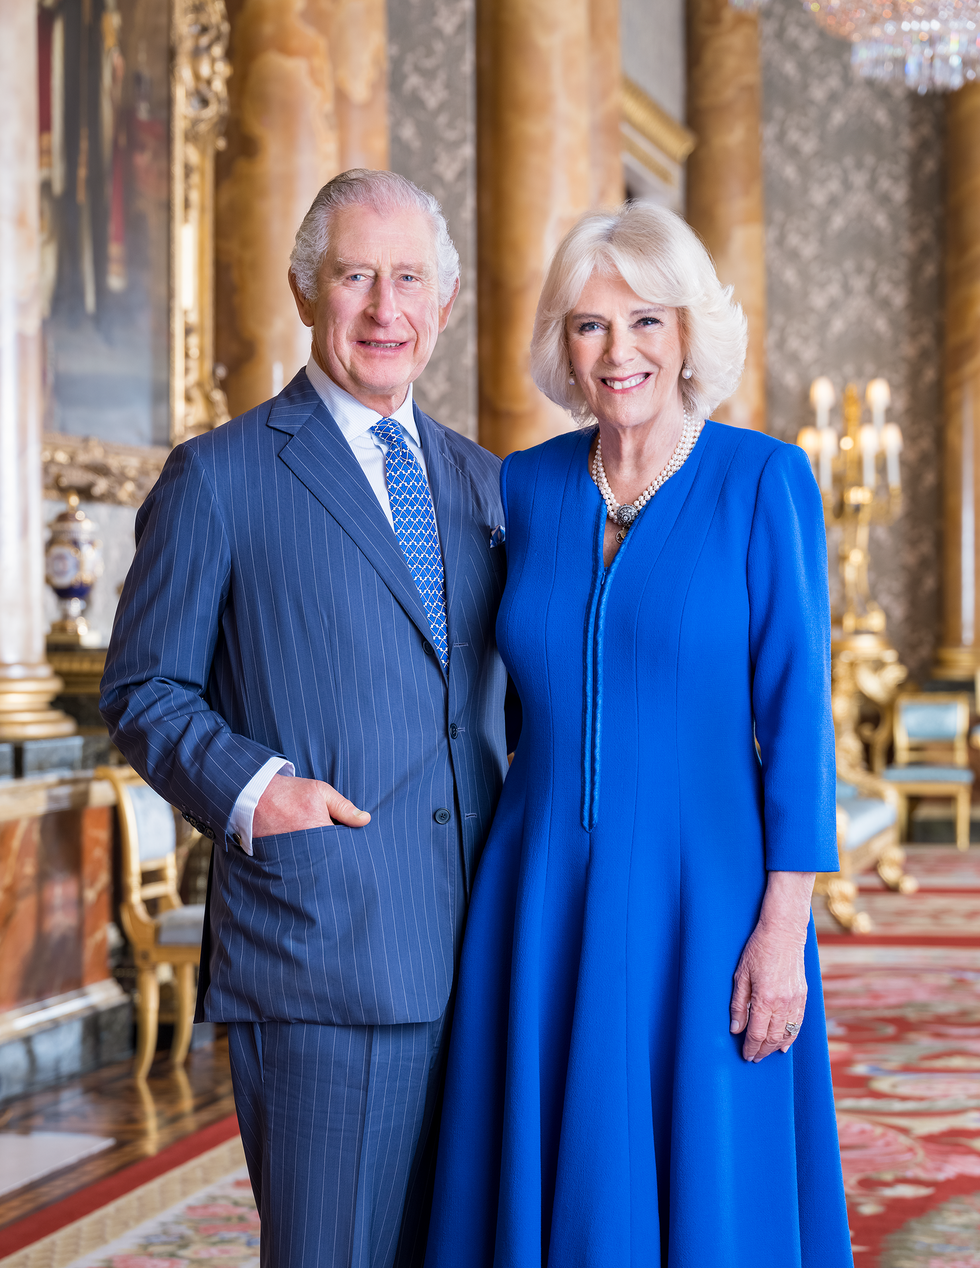 A photograph of Charles III and his queen consort, Camilla, released ahead of the coronation